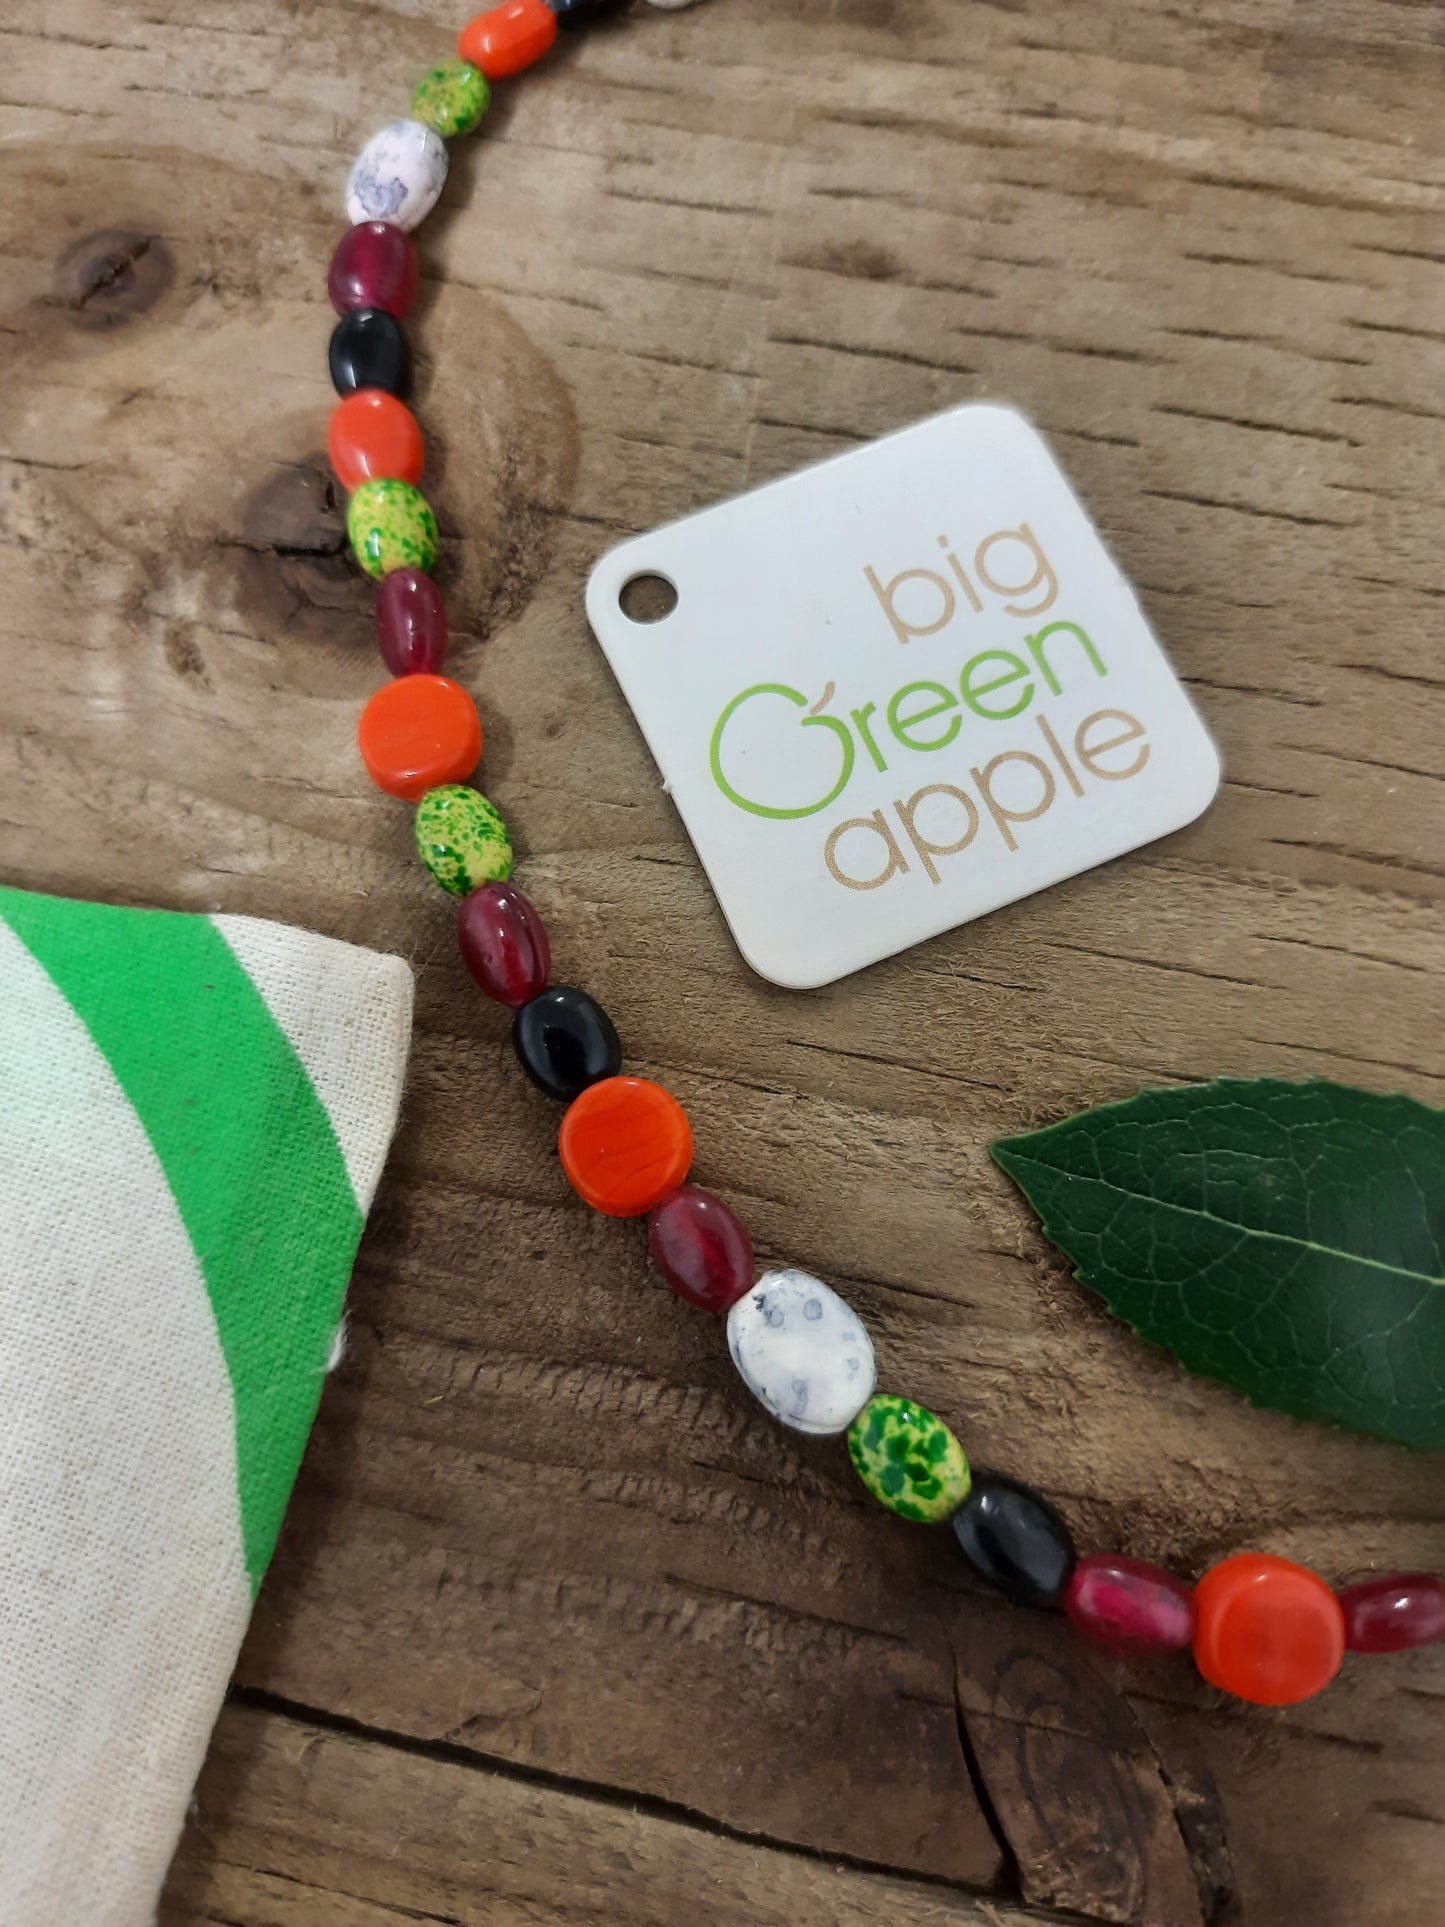 Eco Friendly Things, Sustainable Products, Necklace, Ethical Presents, Jewelry Fair Trade, BIG GREEN APPLE